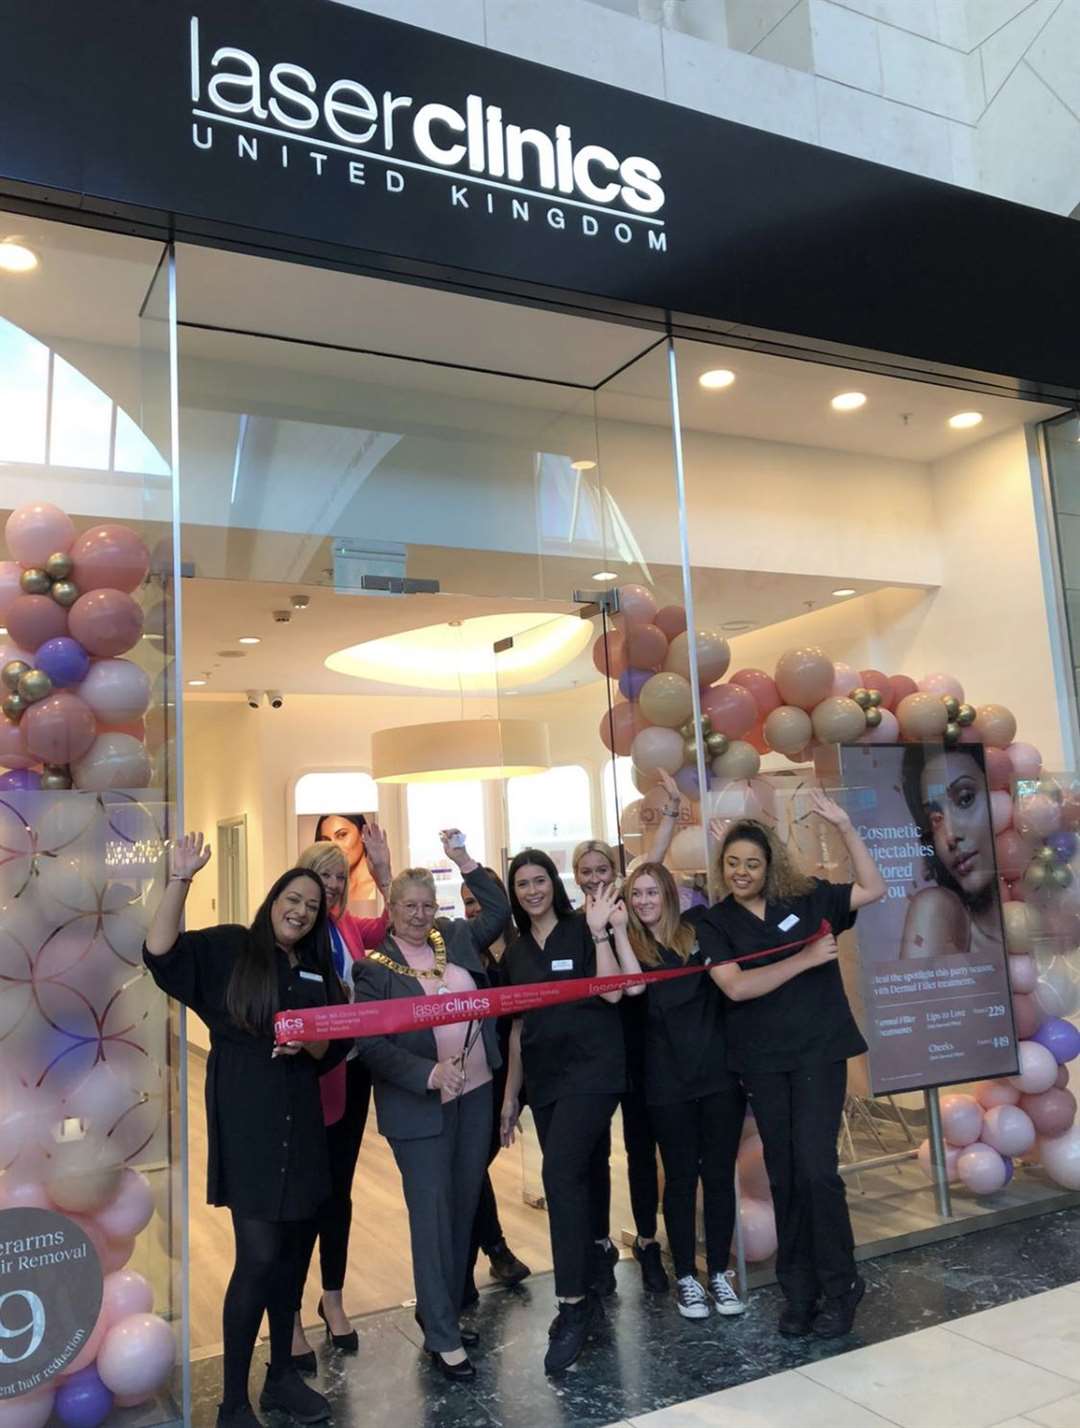 Laser Clinics UK has officially opened at Bluewater